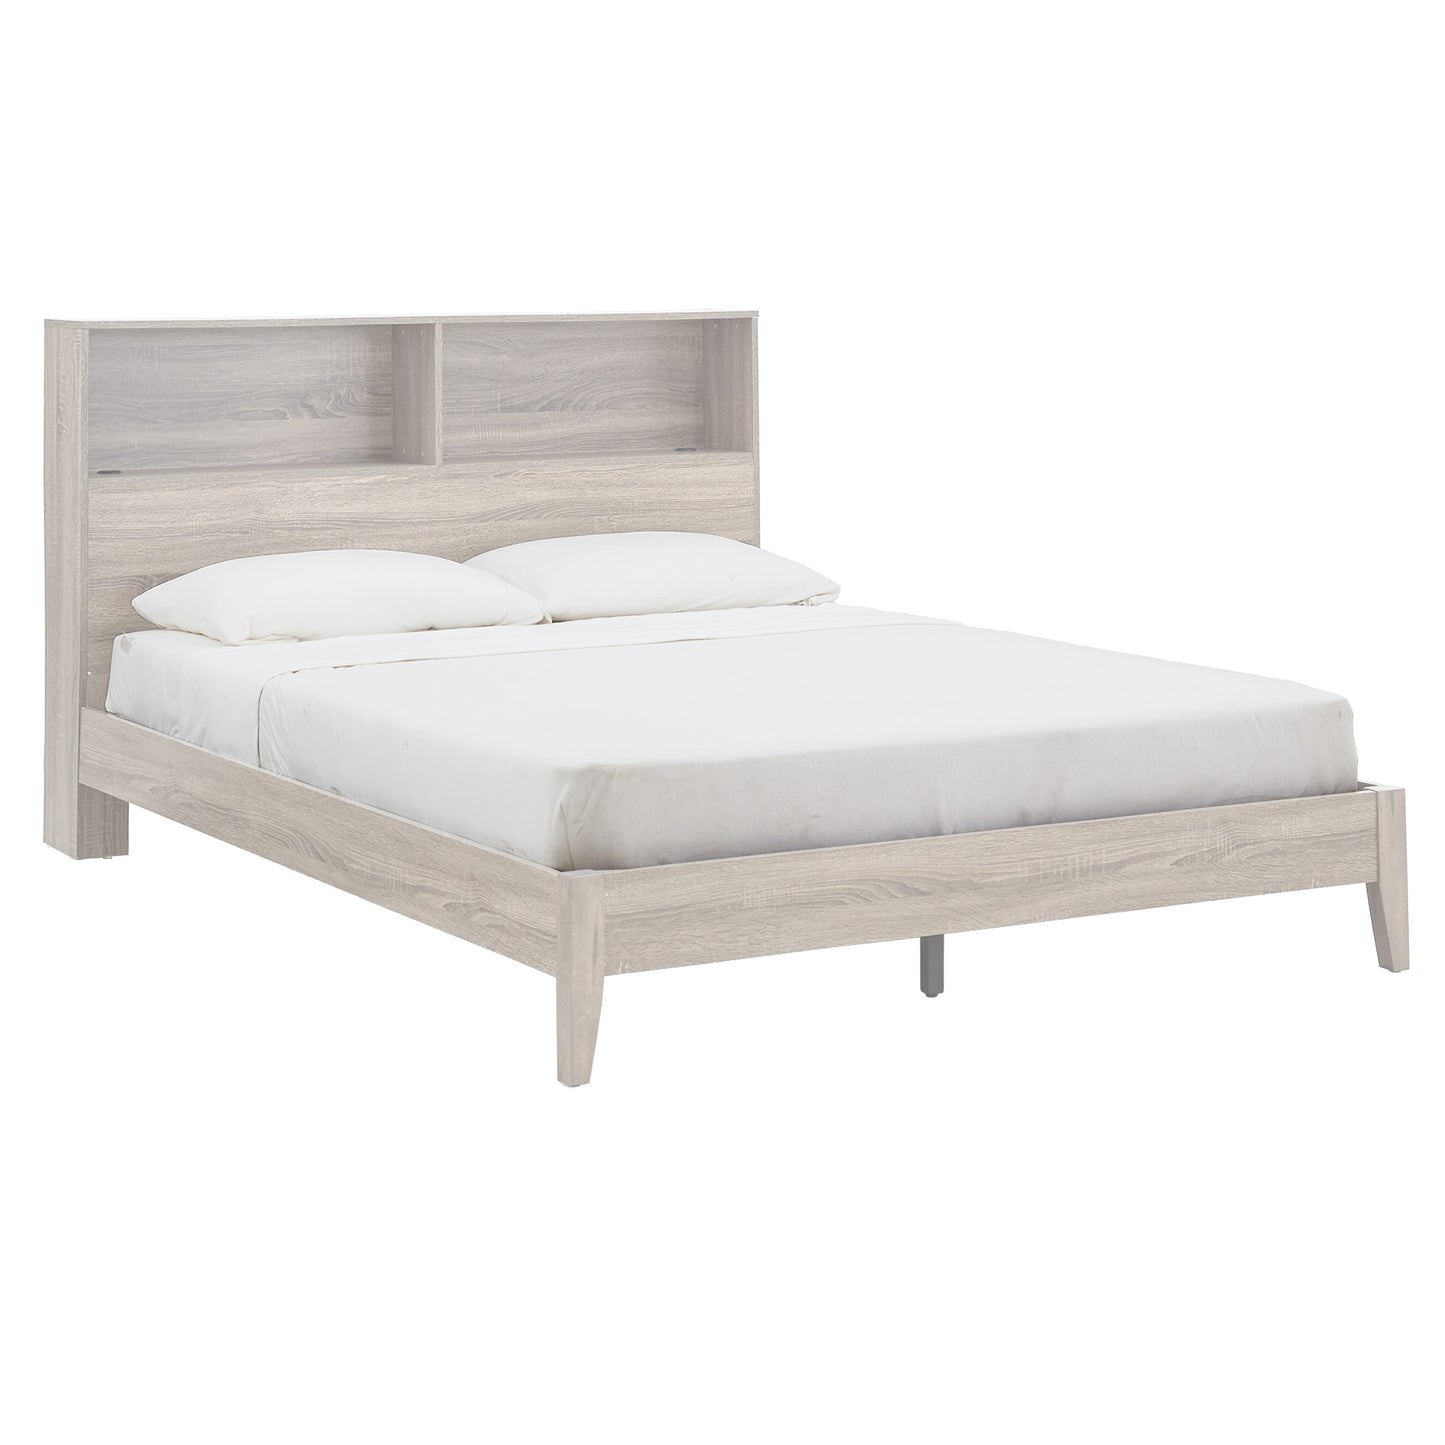 Bookcase Platform Bed with USBs - White Finish, Queen Size